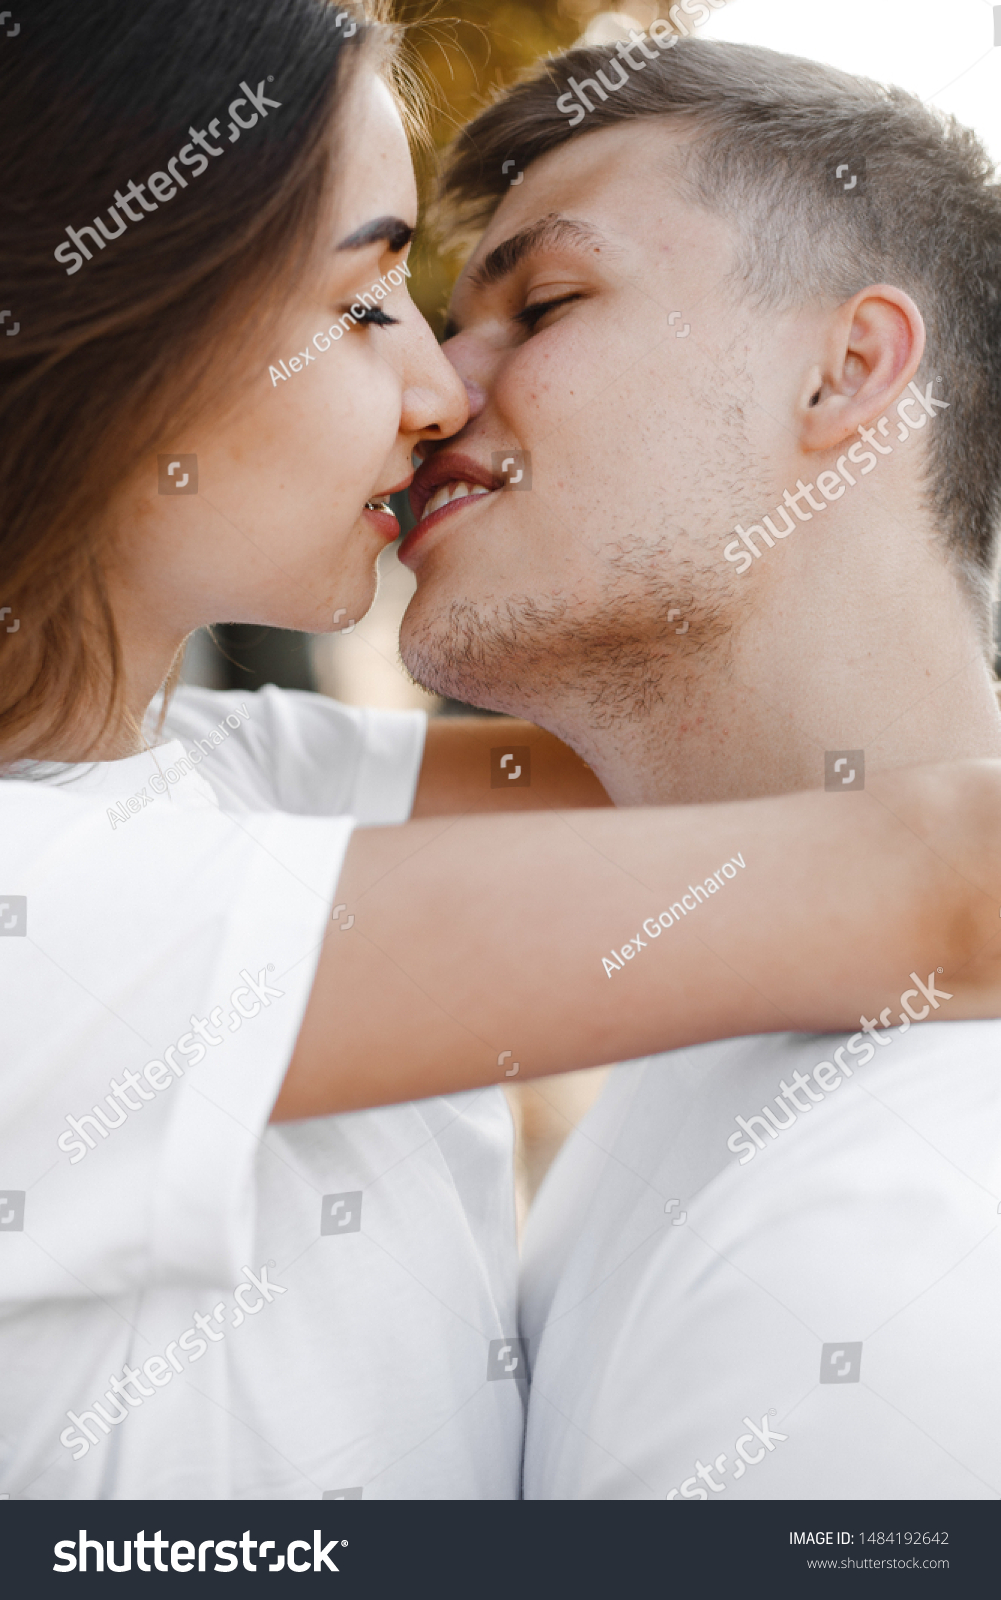 darius s recommends boy and girl kiss pics pic